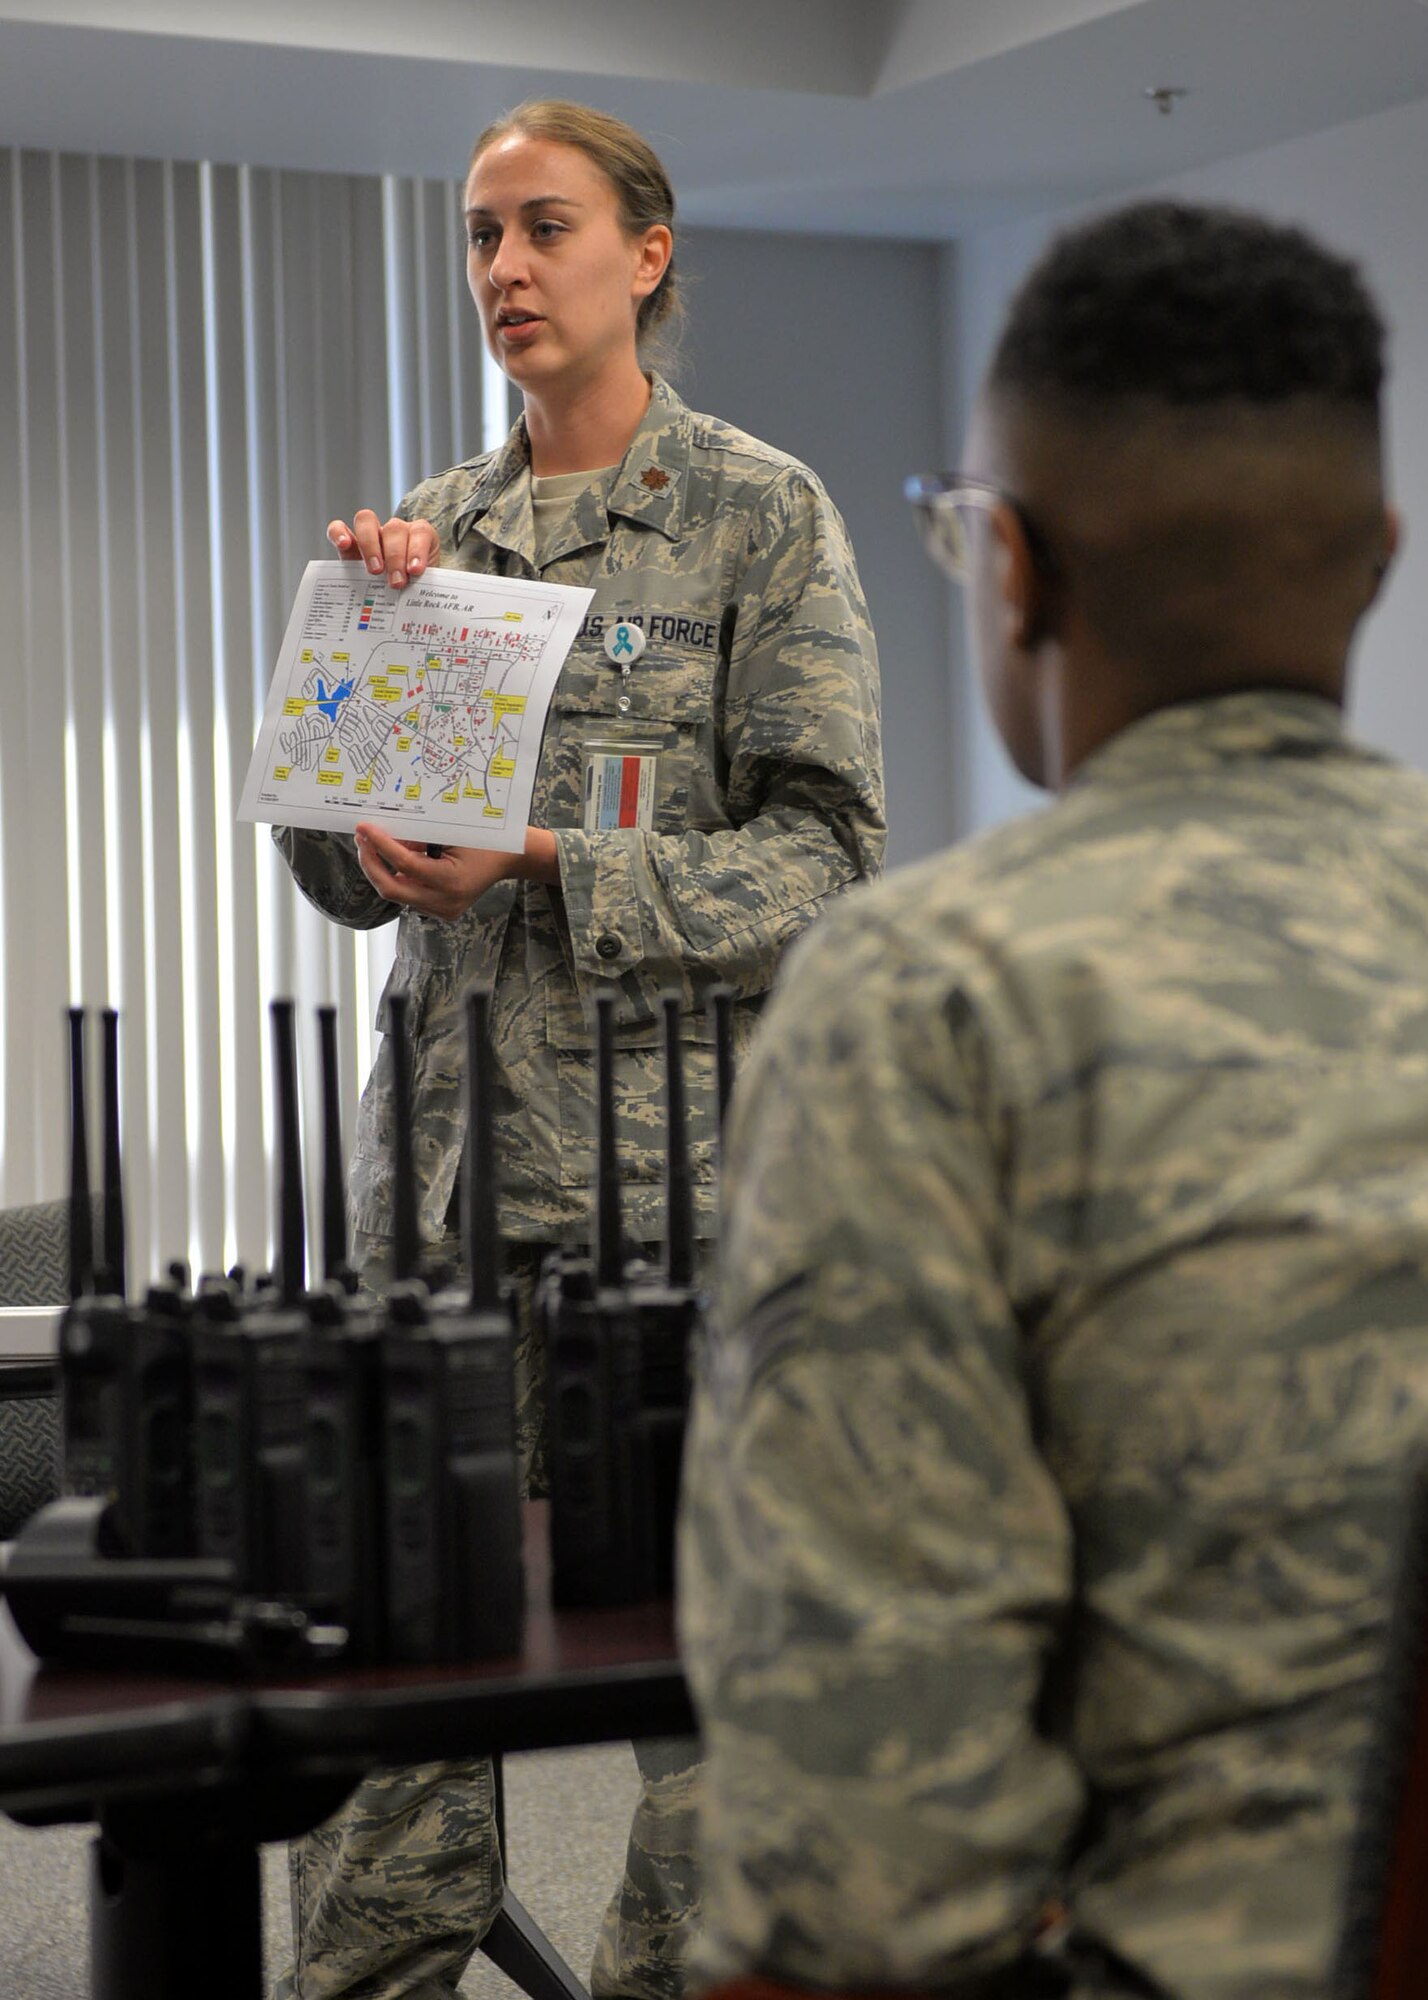 Maj. Rachel Copeland briefs airmen during an exercise Aug. 24, 2017, at Little Rock Air Force Base, Ark. The 19th Medical Group shuts its doors every month to prepare airmen for potentially real- life emergency scenarios. (U.S. Air Force photo by Airman 1st Class Codie Collins)